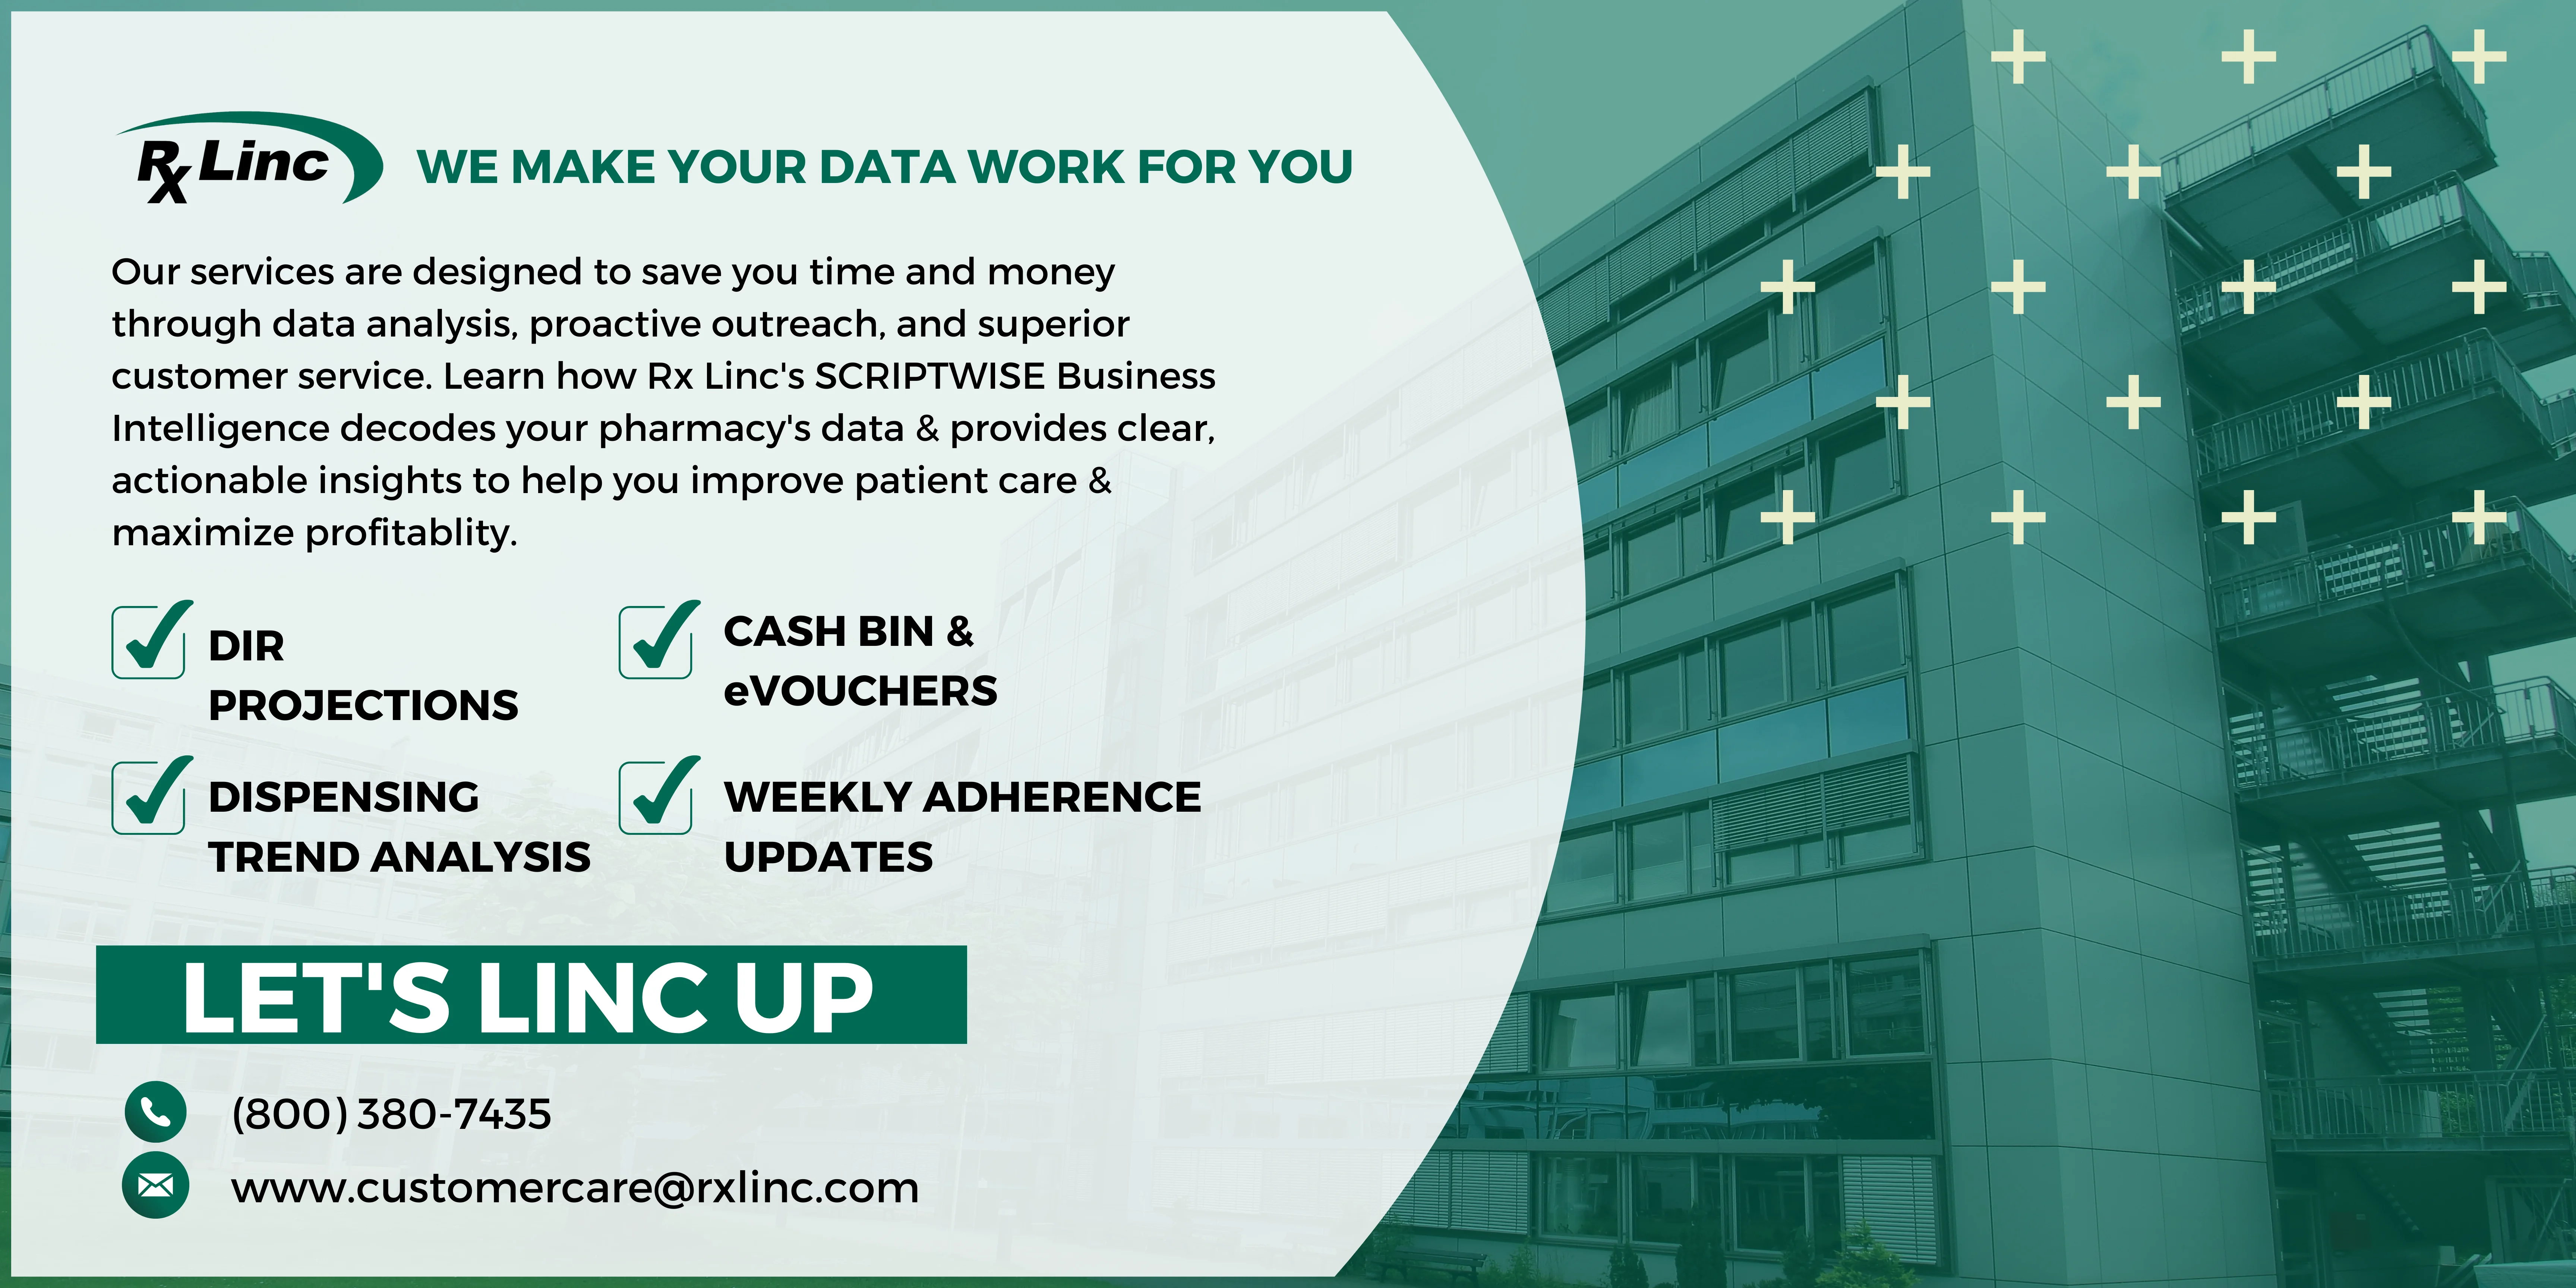 Rx Linc We Make You Data Work for You.webp